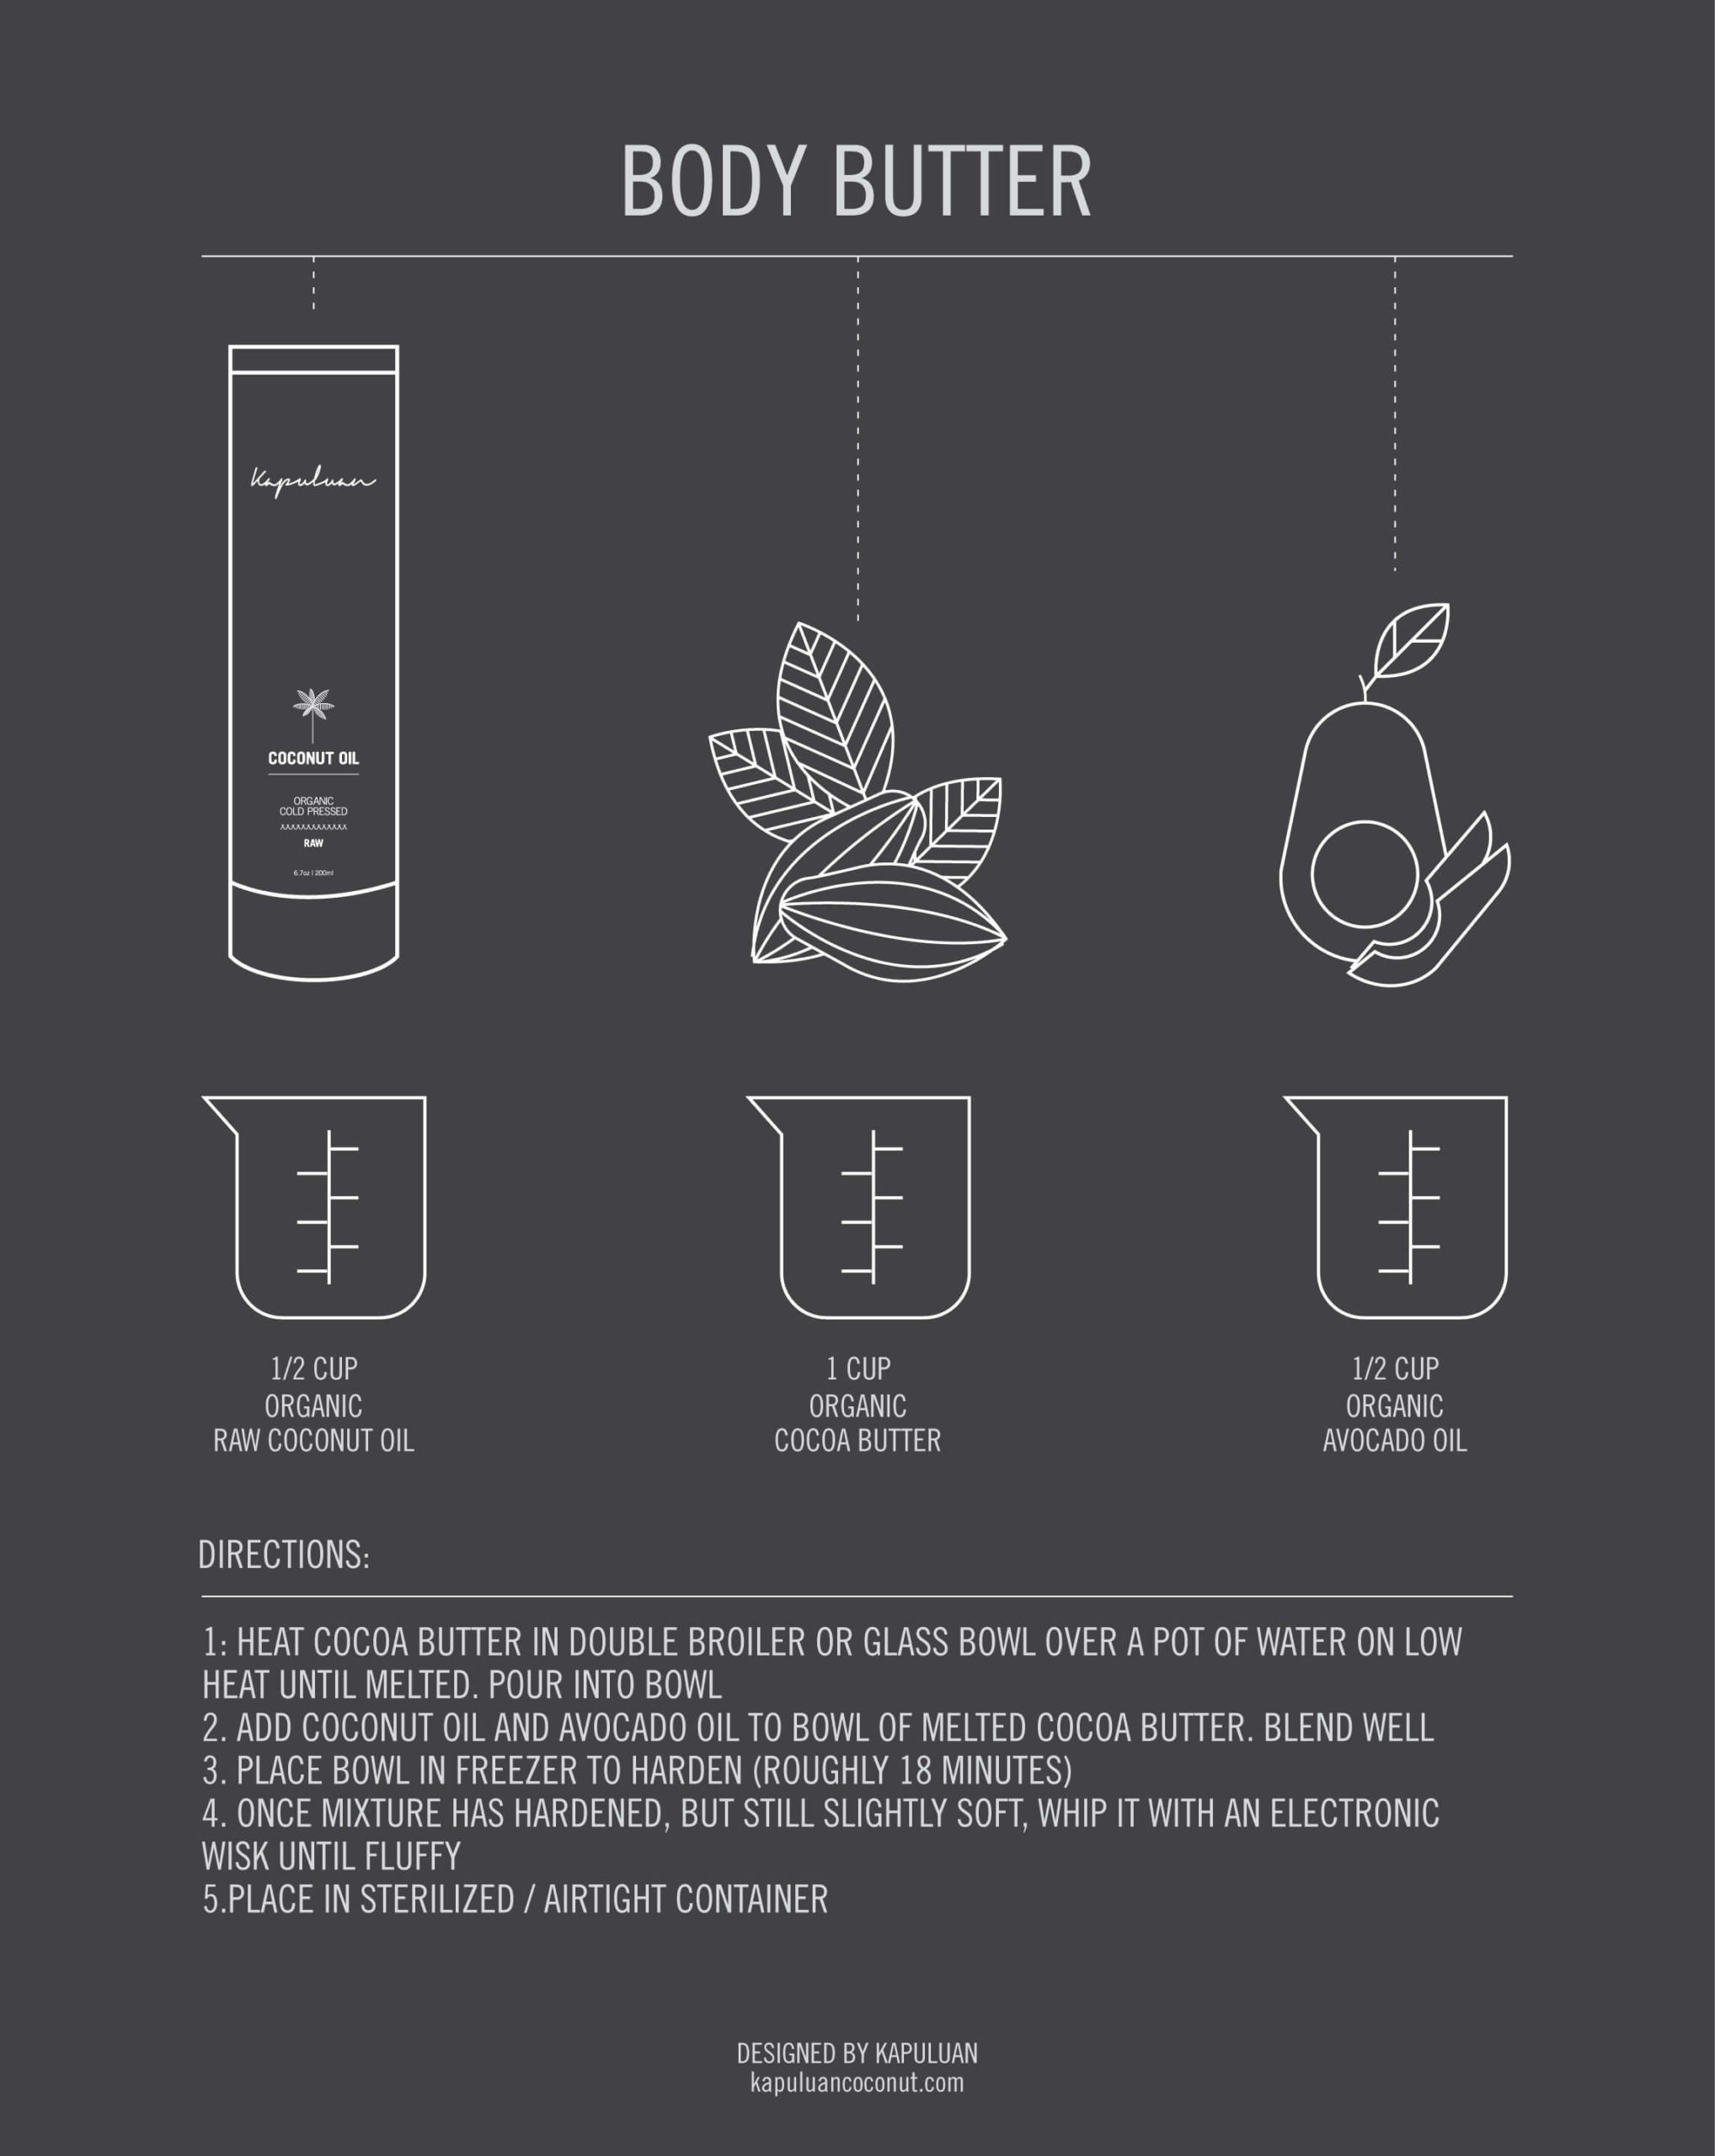 Illustrated recipe instructions for making coconut body butter with ingredients and step-by-step preparation methods.